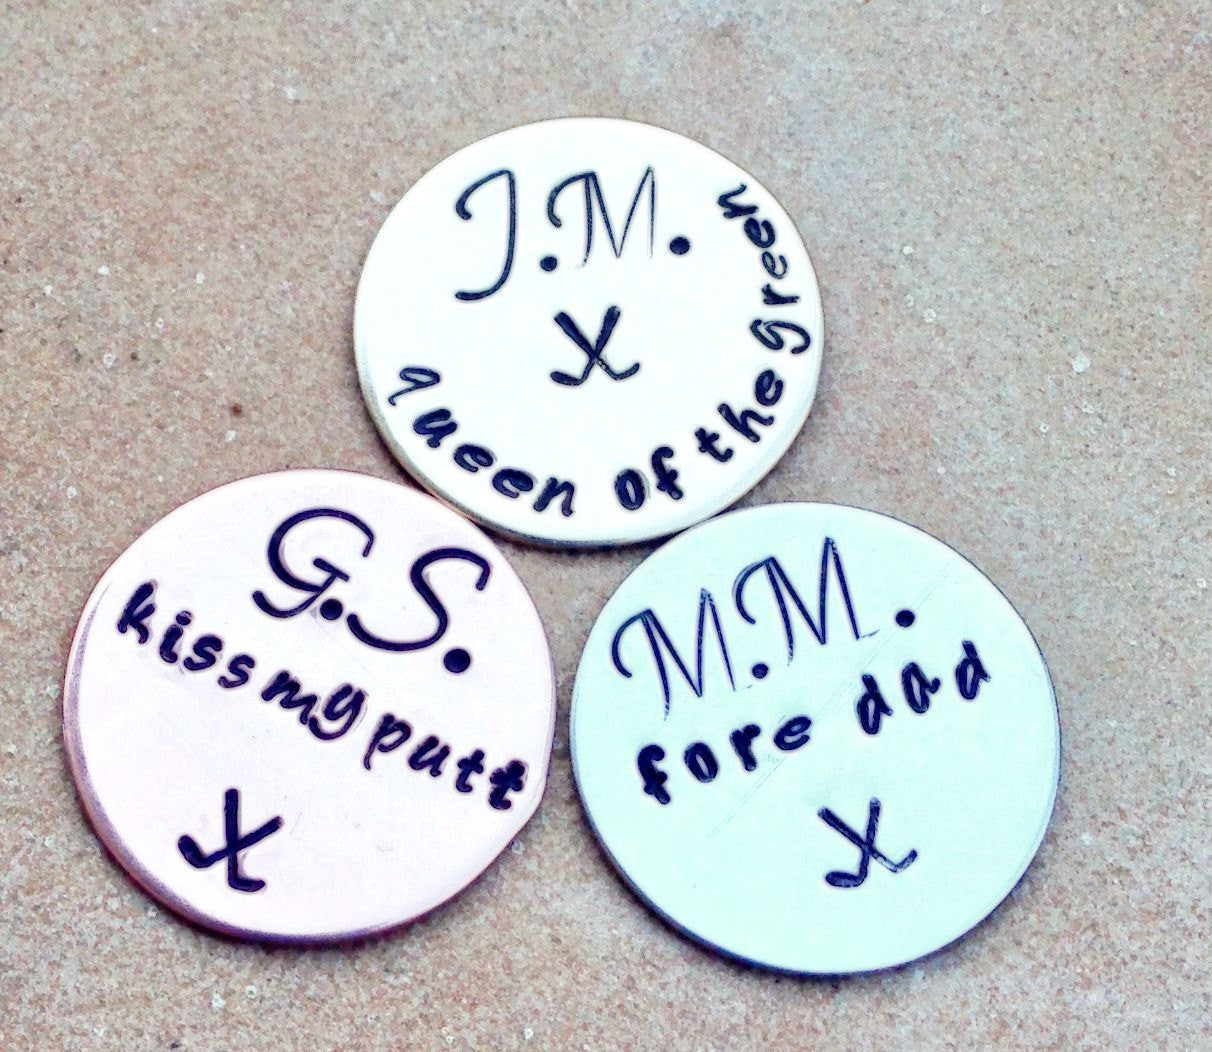 golf markers, Fathers Day Gift, gifts for dad, fore dad, kiss my putt, golf, golf gifts, Mothers Day, personalized gifts - Natashaaloha, jewelry, bracelets, necklace, keychains, fishing lures, gifts for men, charms, personalized, 